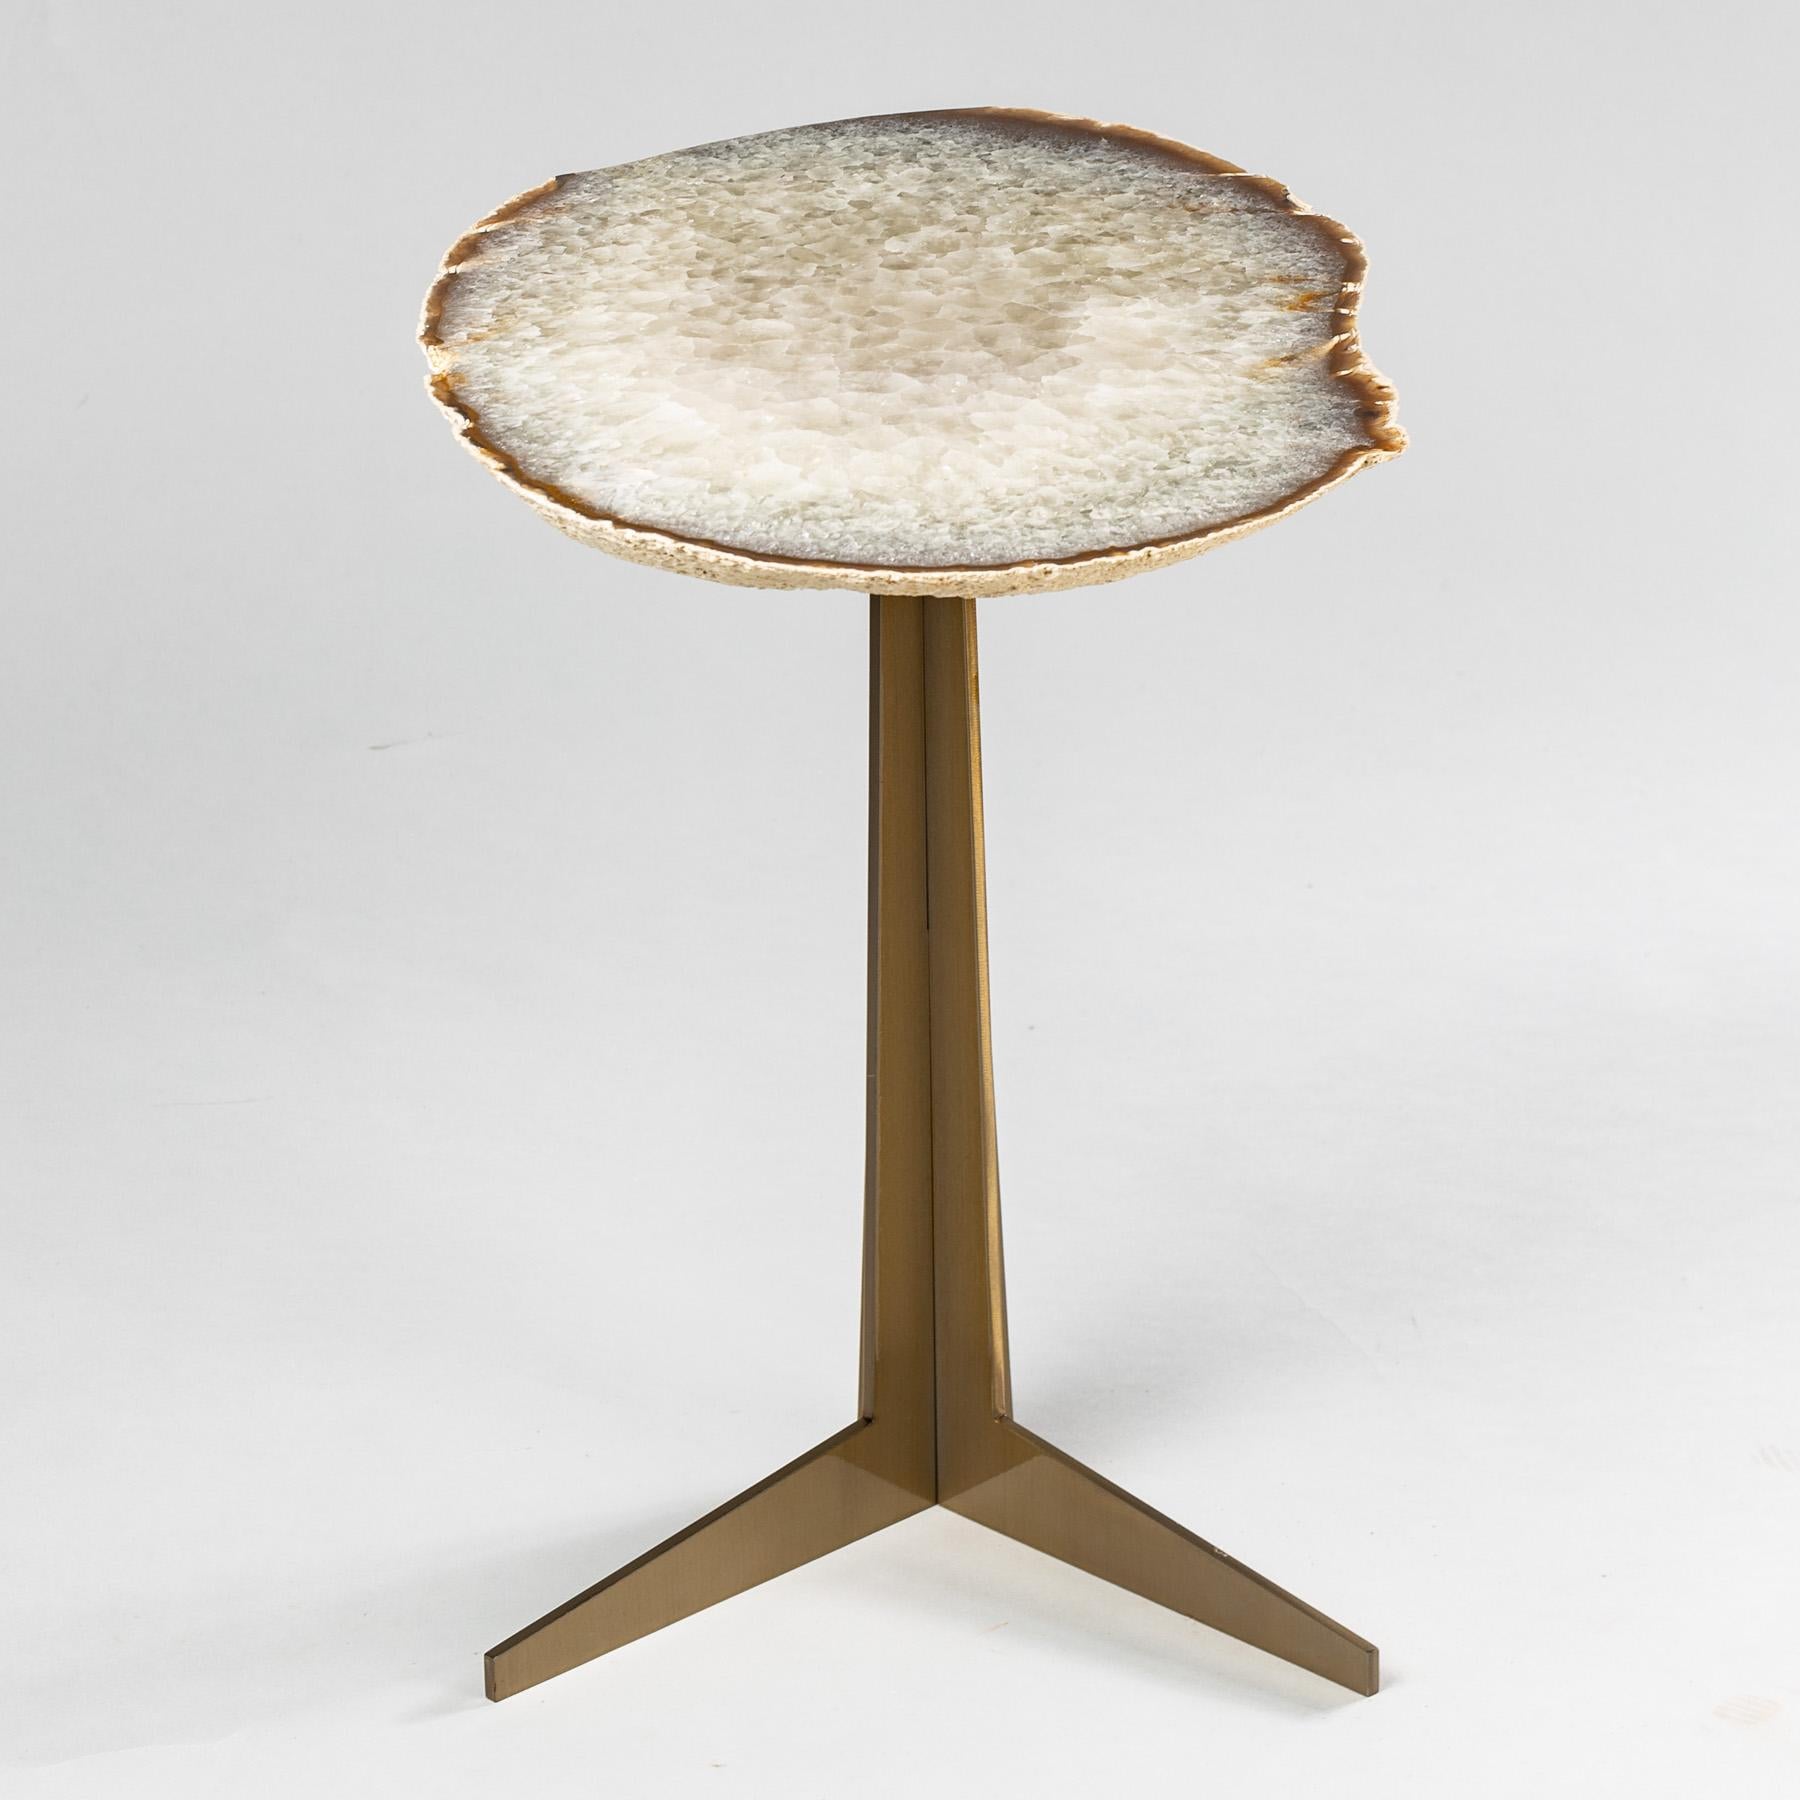 Mexican Side or Cocktail Table, Brazilian Agate with Gold Color Metal Base